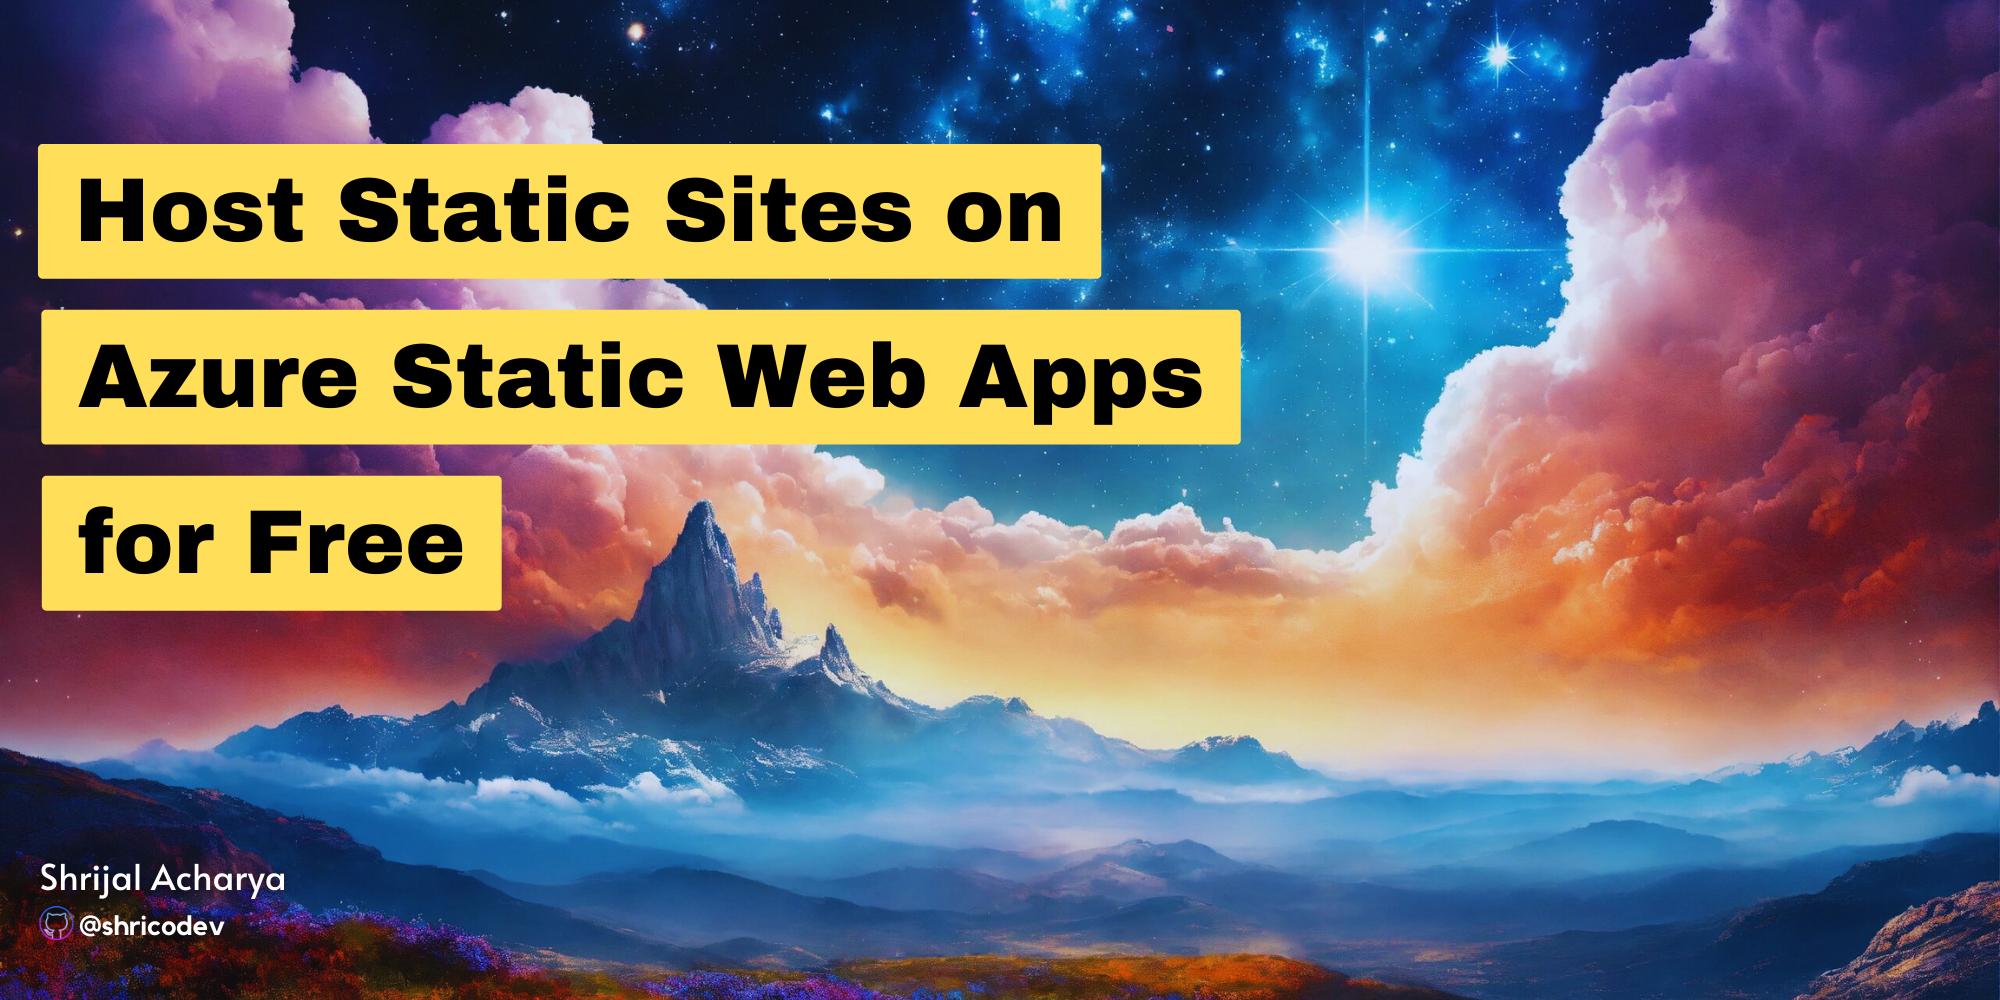 Image for How to Host Static Sites on Azure Static Web Apps for Free